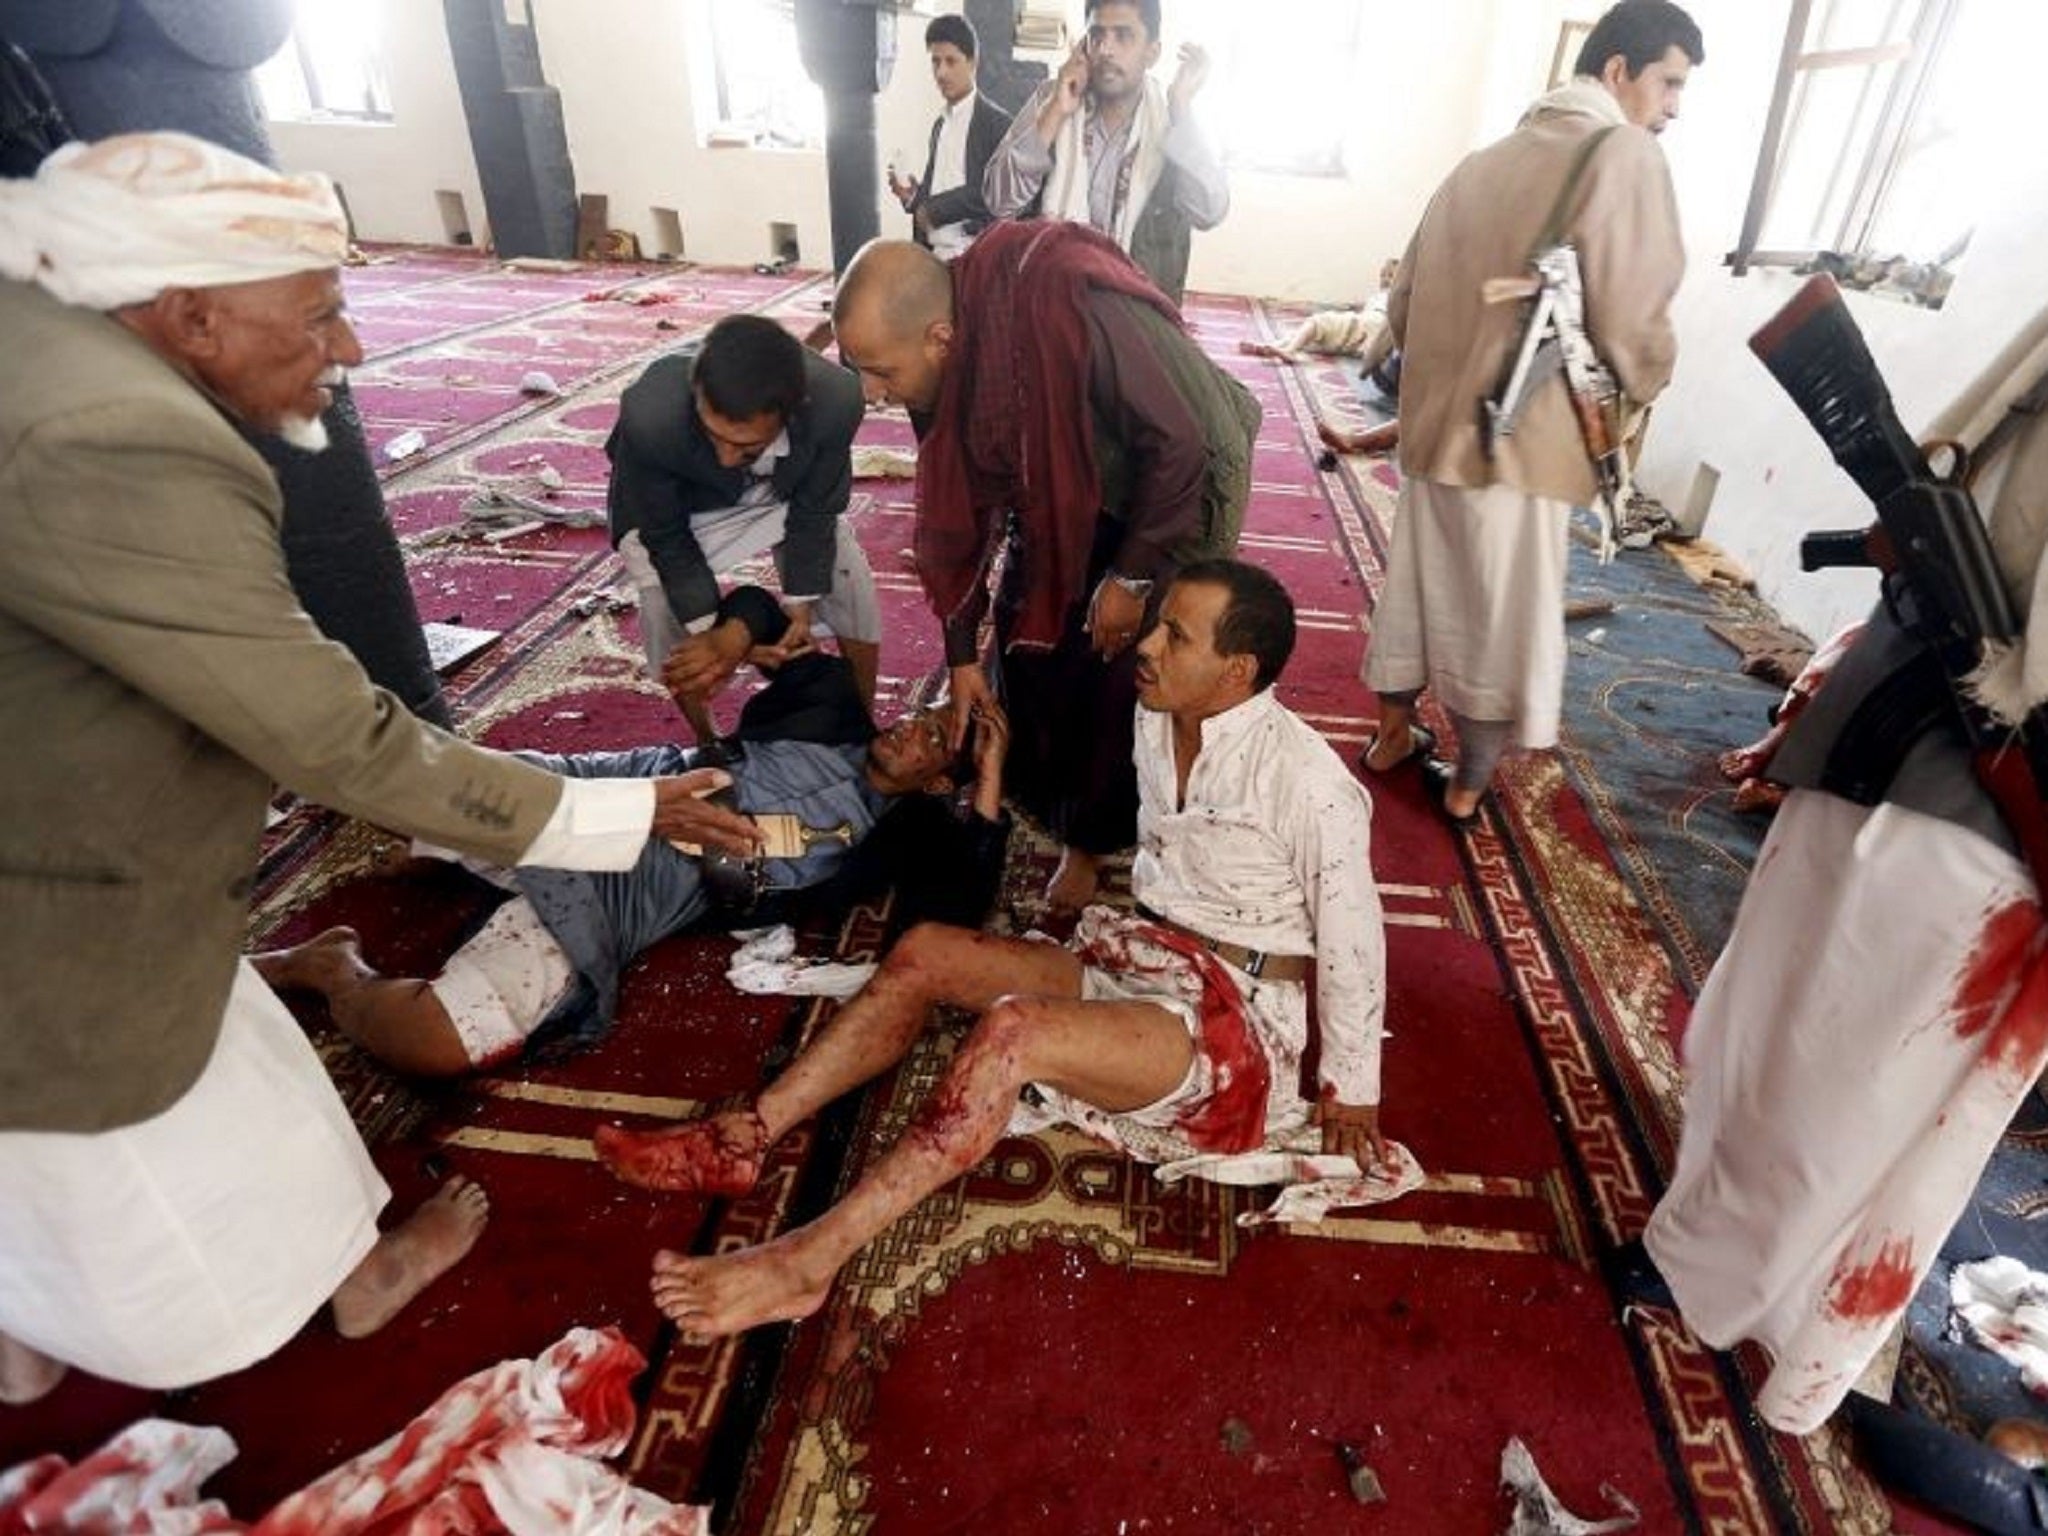 Men attend to injured worshippers at one of the targeted mosques in Sanaa, Yemen